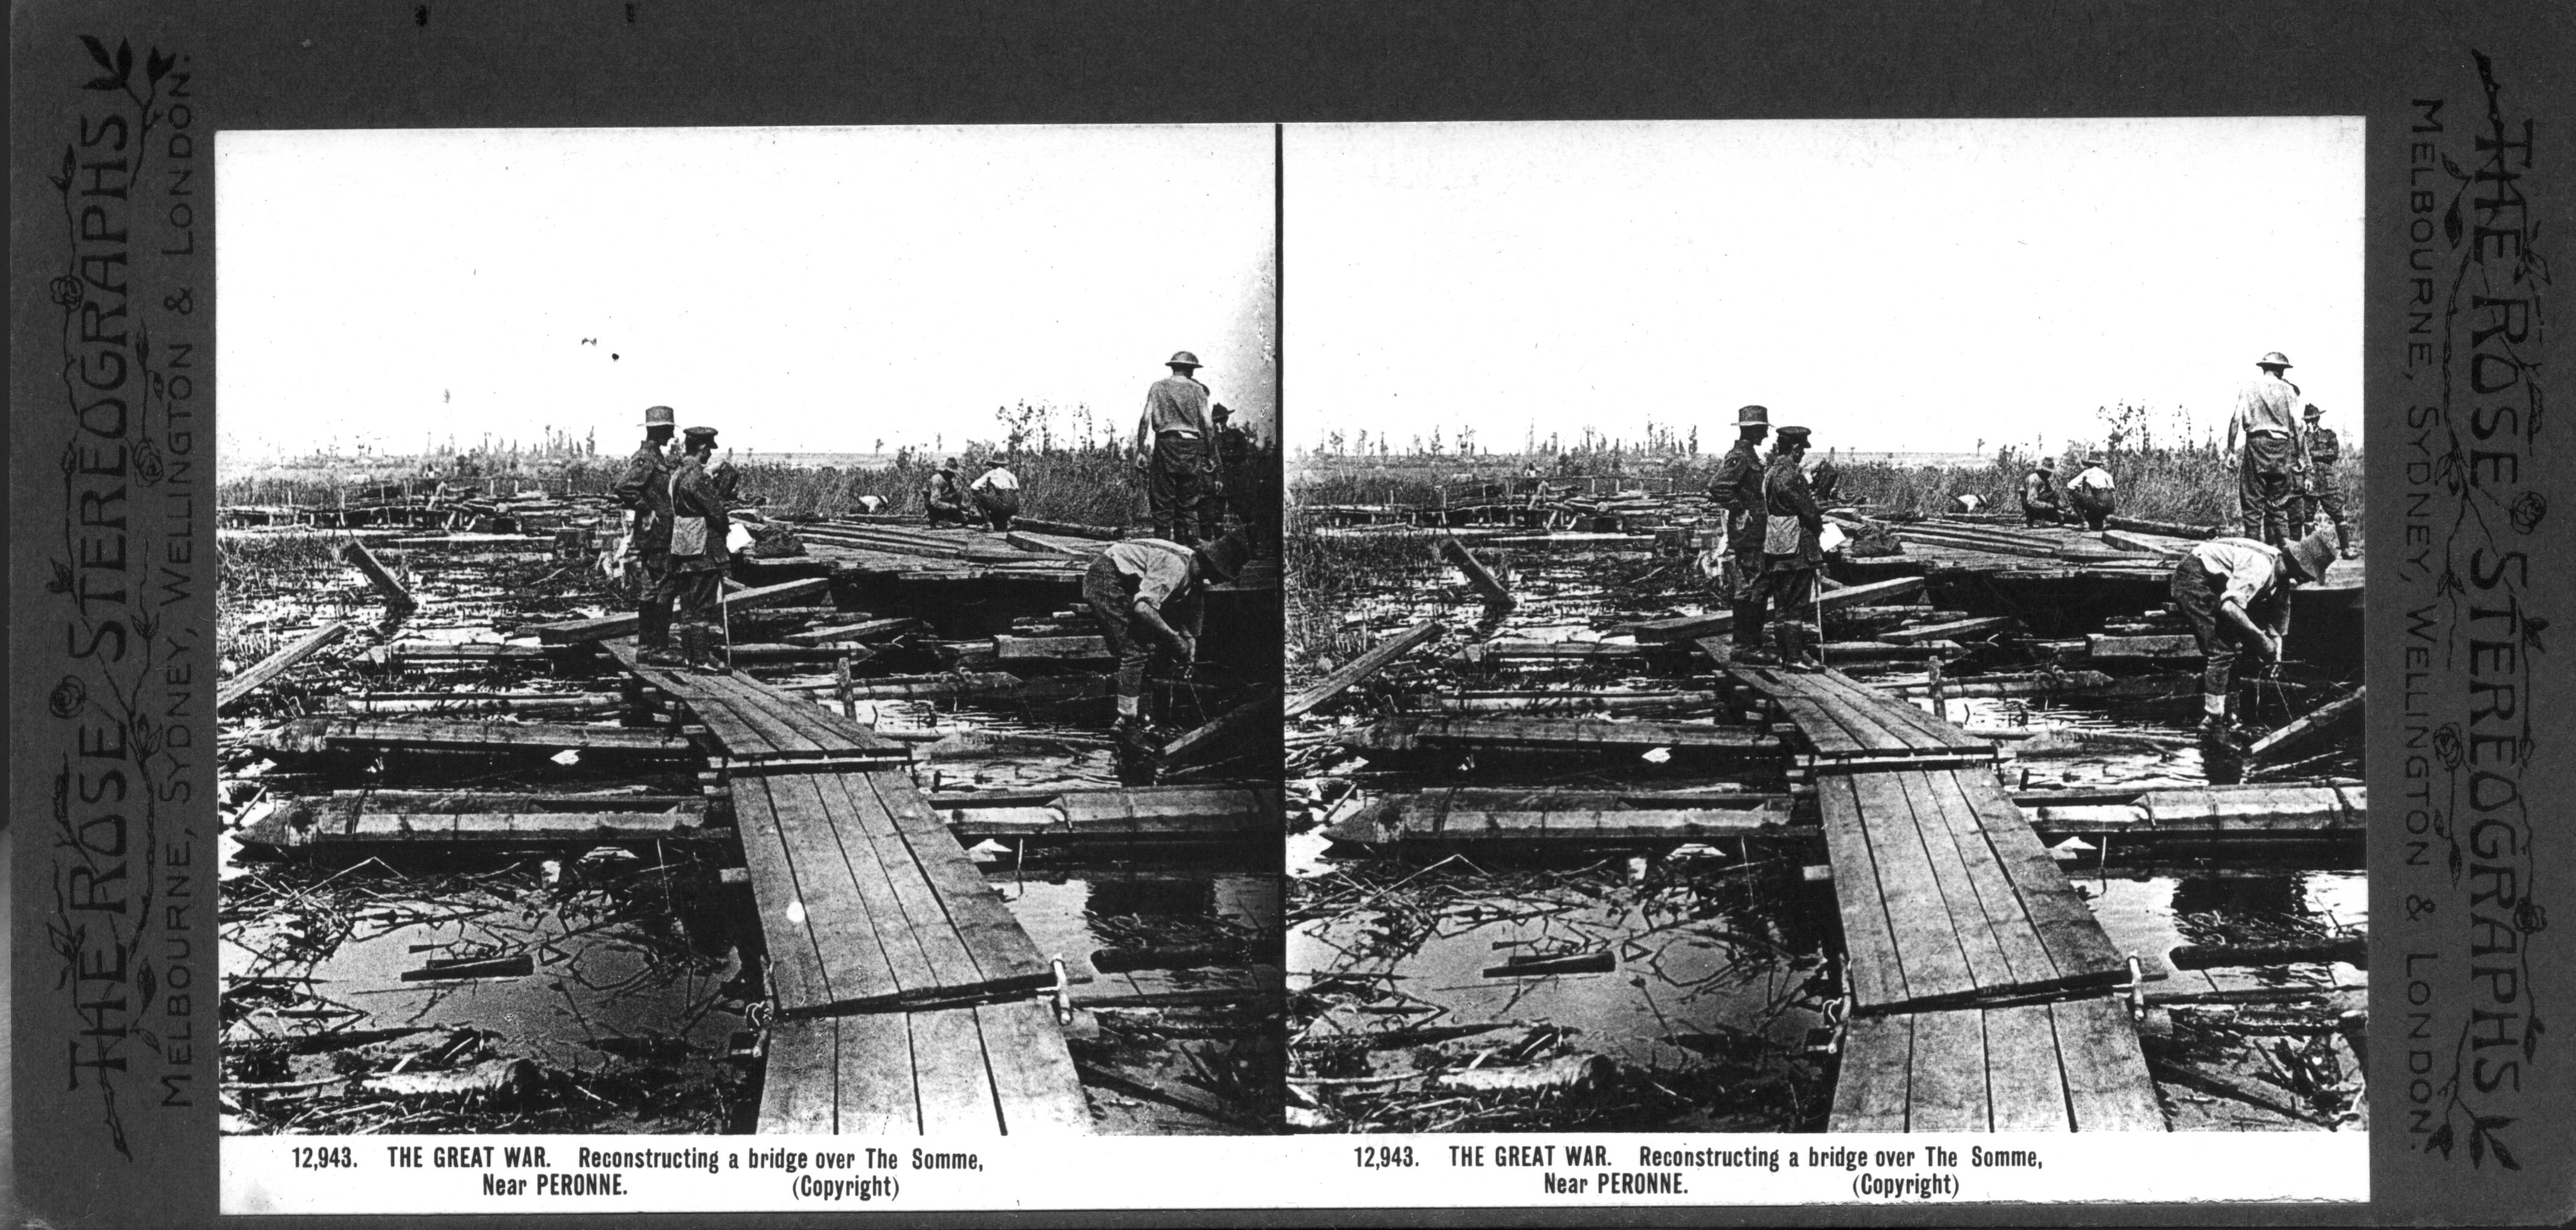 THE GREAT WAR. Reconstructing a bridge over The Somme, Near PERONNE.